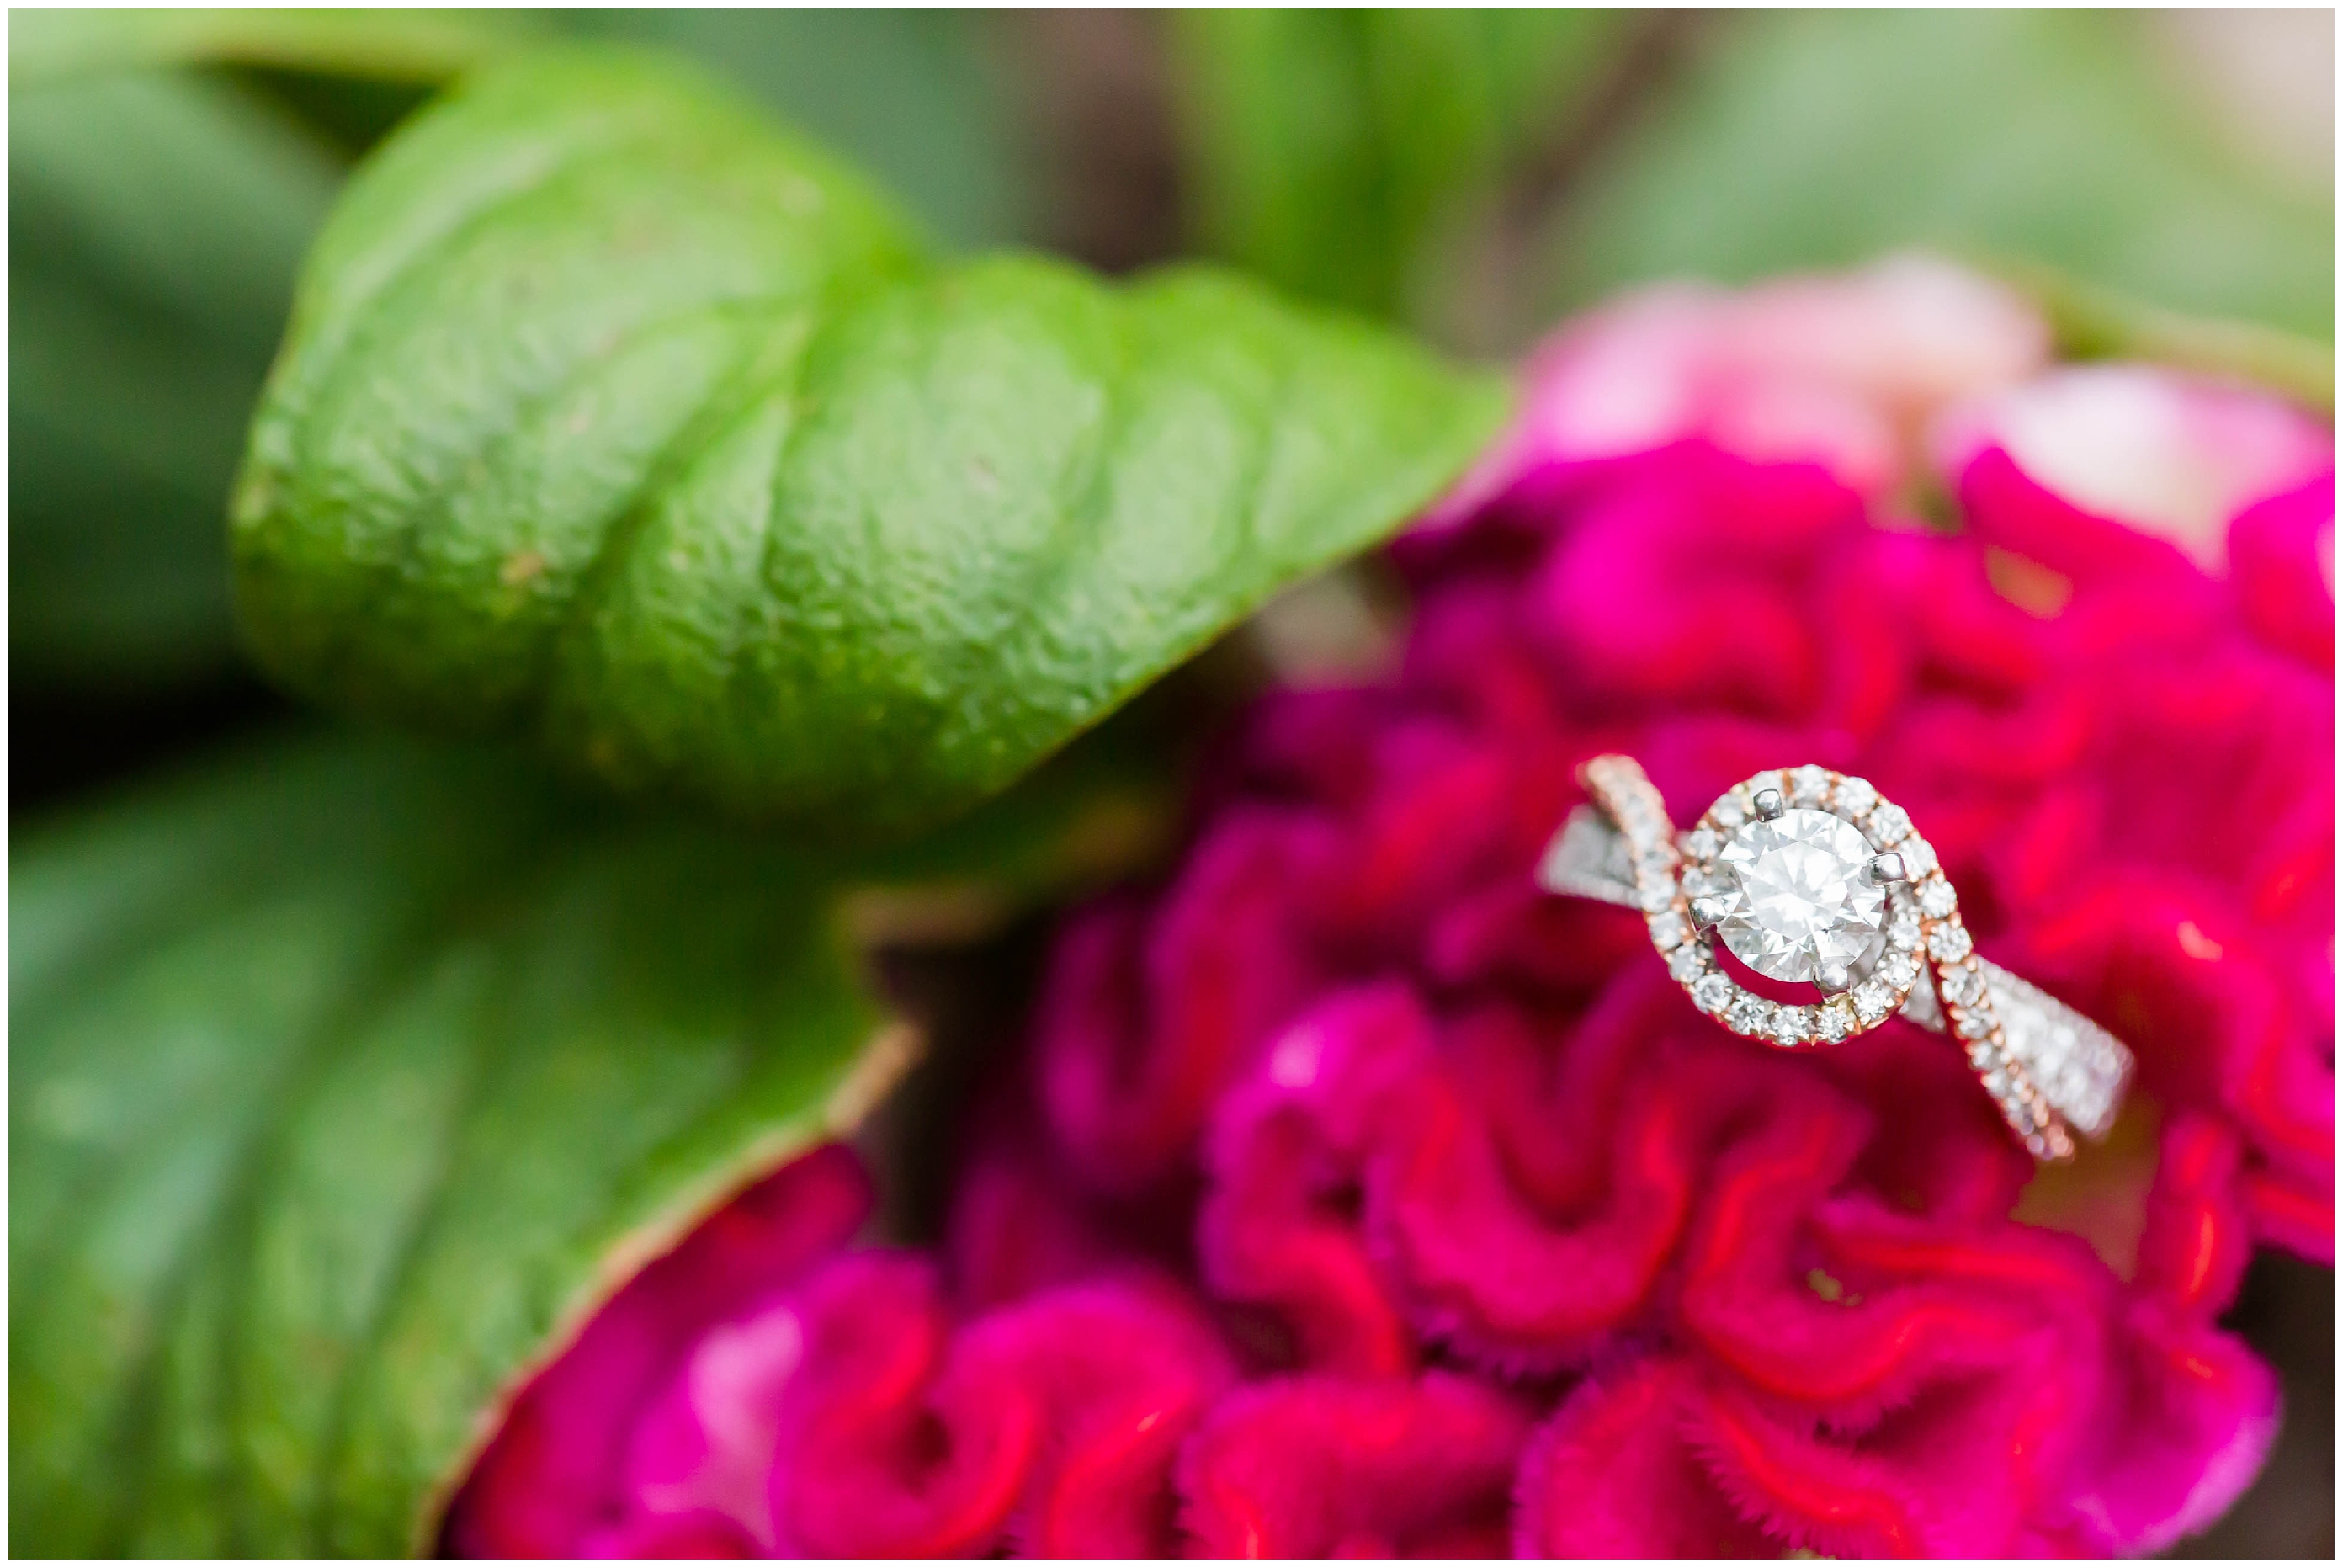 Infinity engagement ring with rose gold,Quail Hollow State Park Engagement Session,loren jackson photography,photographer akron ohio,